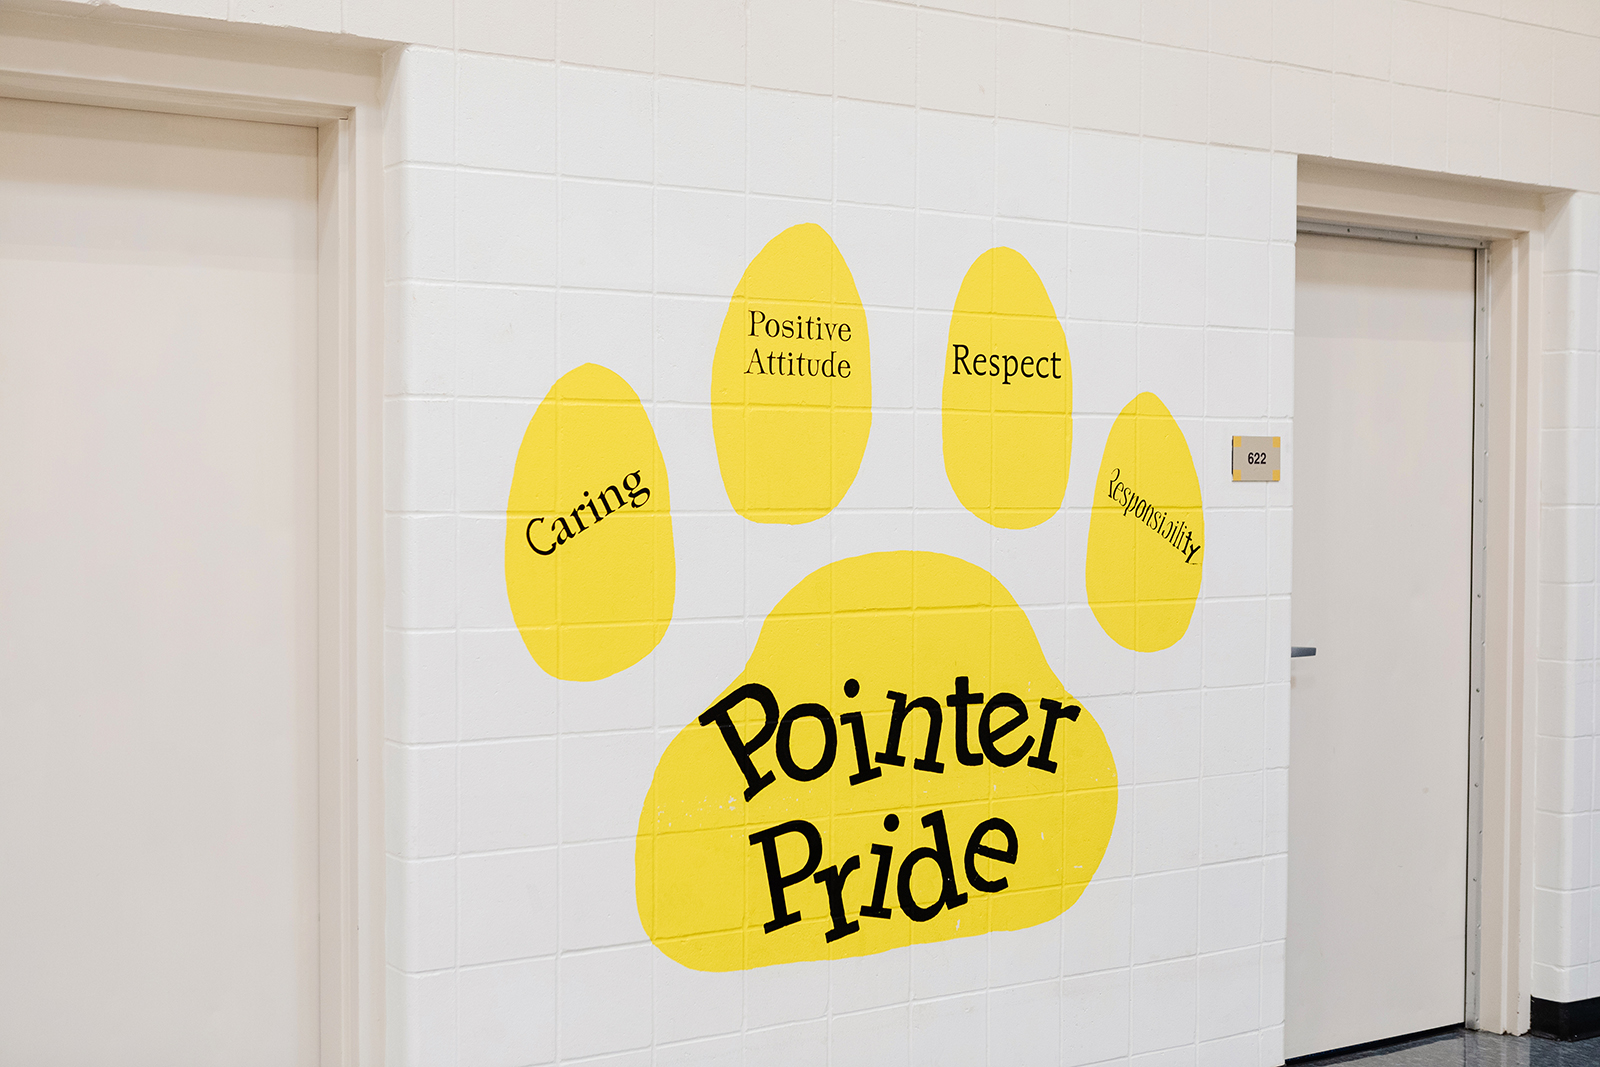 Yellow paw print painted on a wall that has "Pointer Pride" in the center with